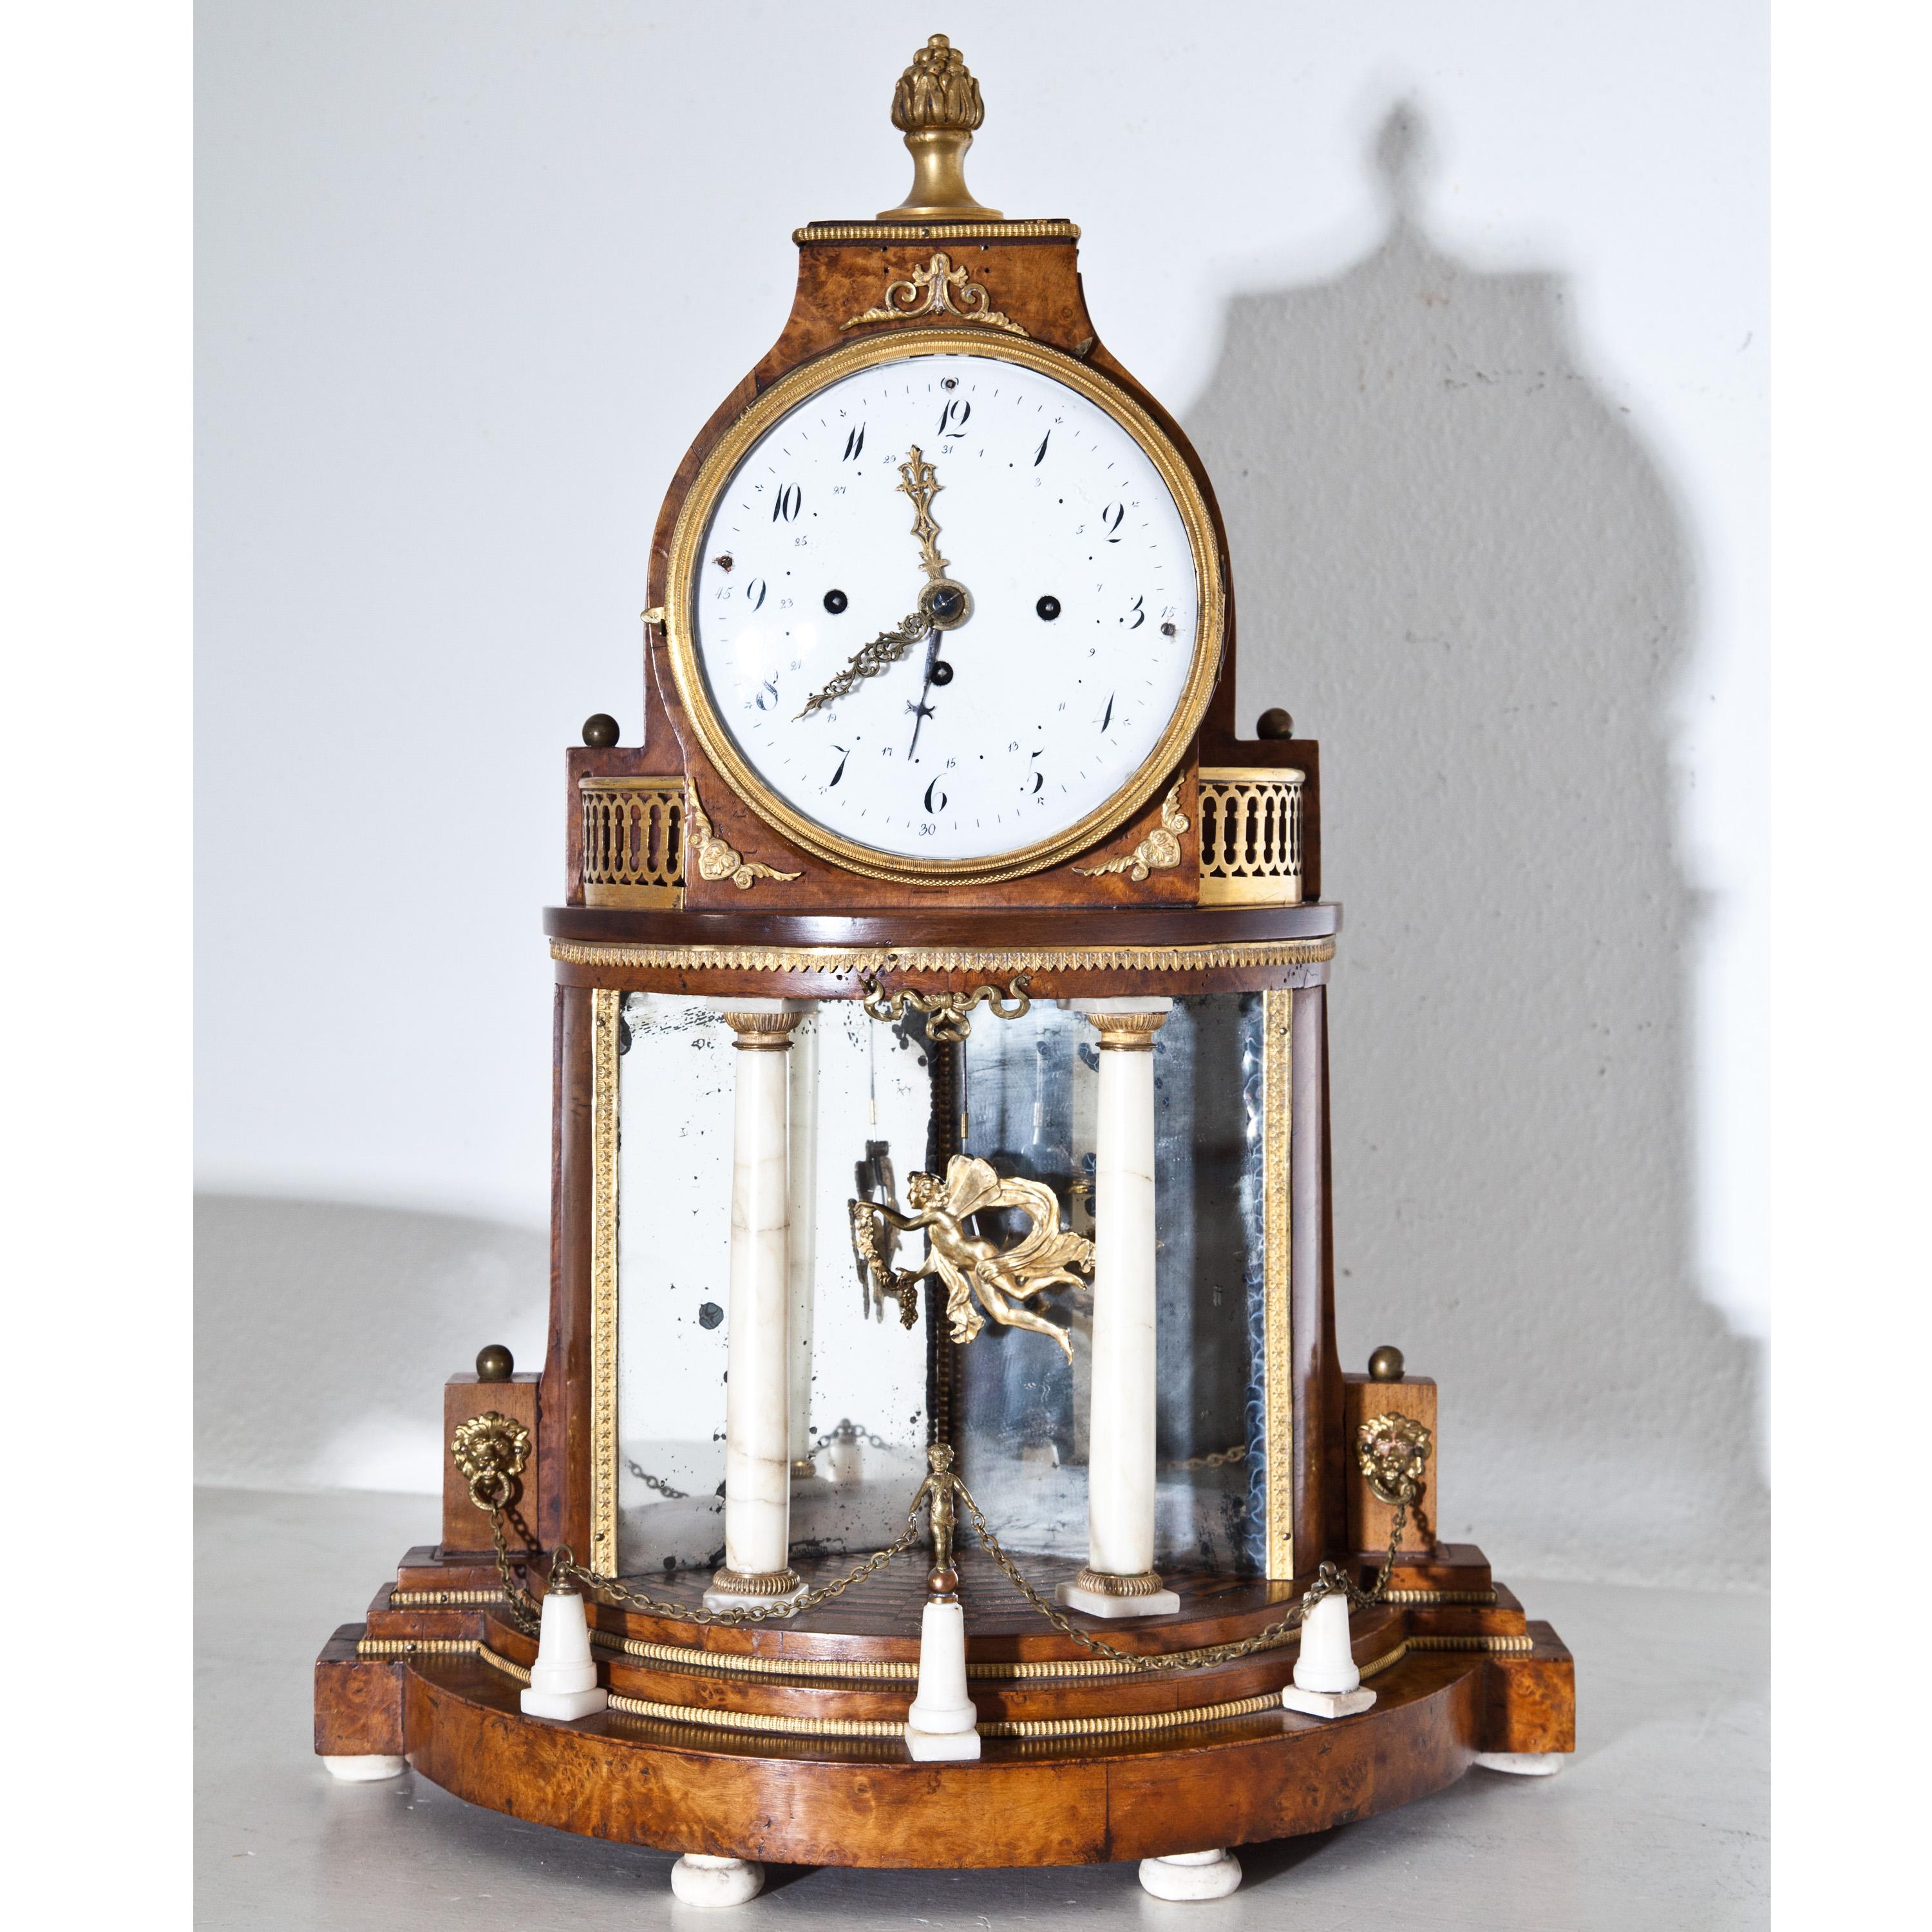 Biedermeier portal clock in an architecturally structured walnut case with alabaster columns, bronze fittings and mirrored rear wall. The clockwork with date and sound spiral. Pendulum in the shape of a winged putto.